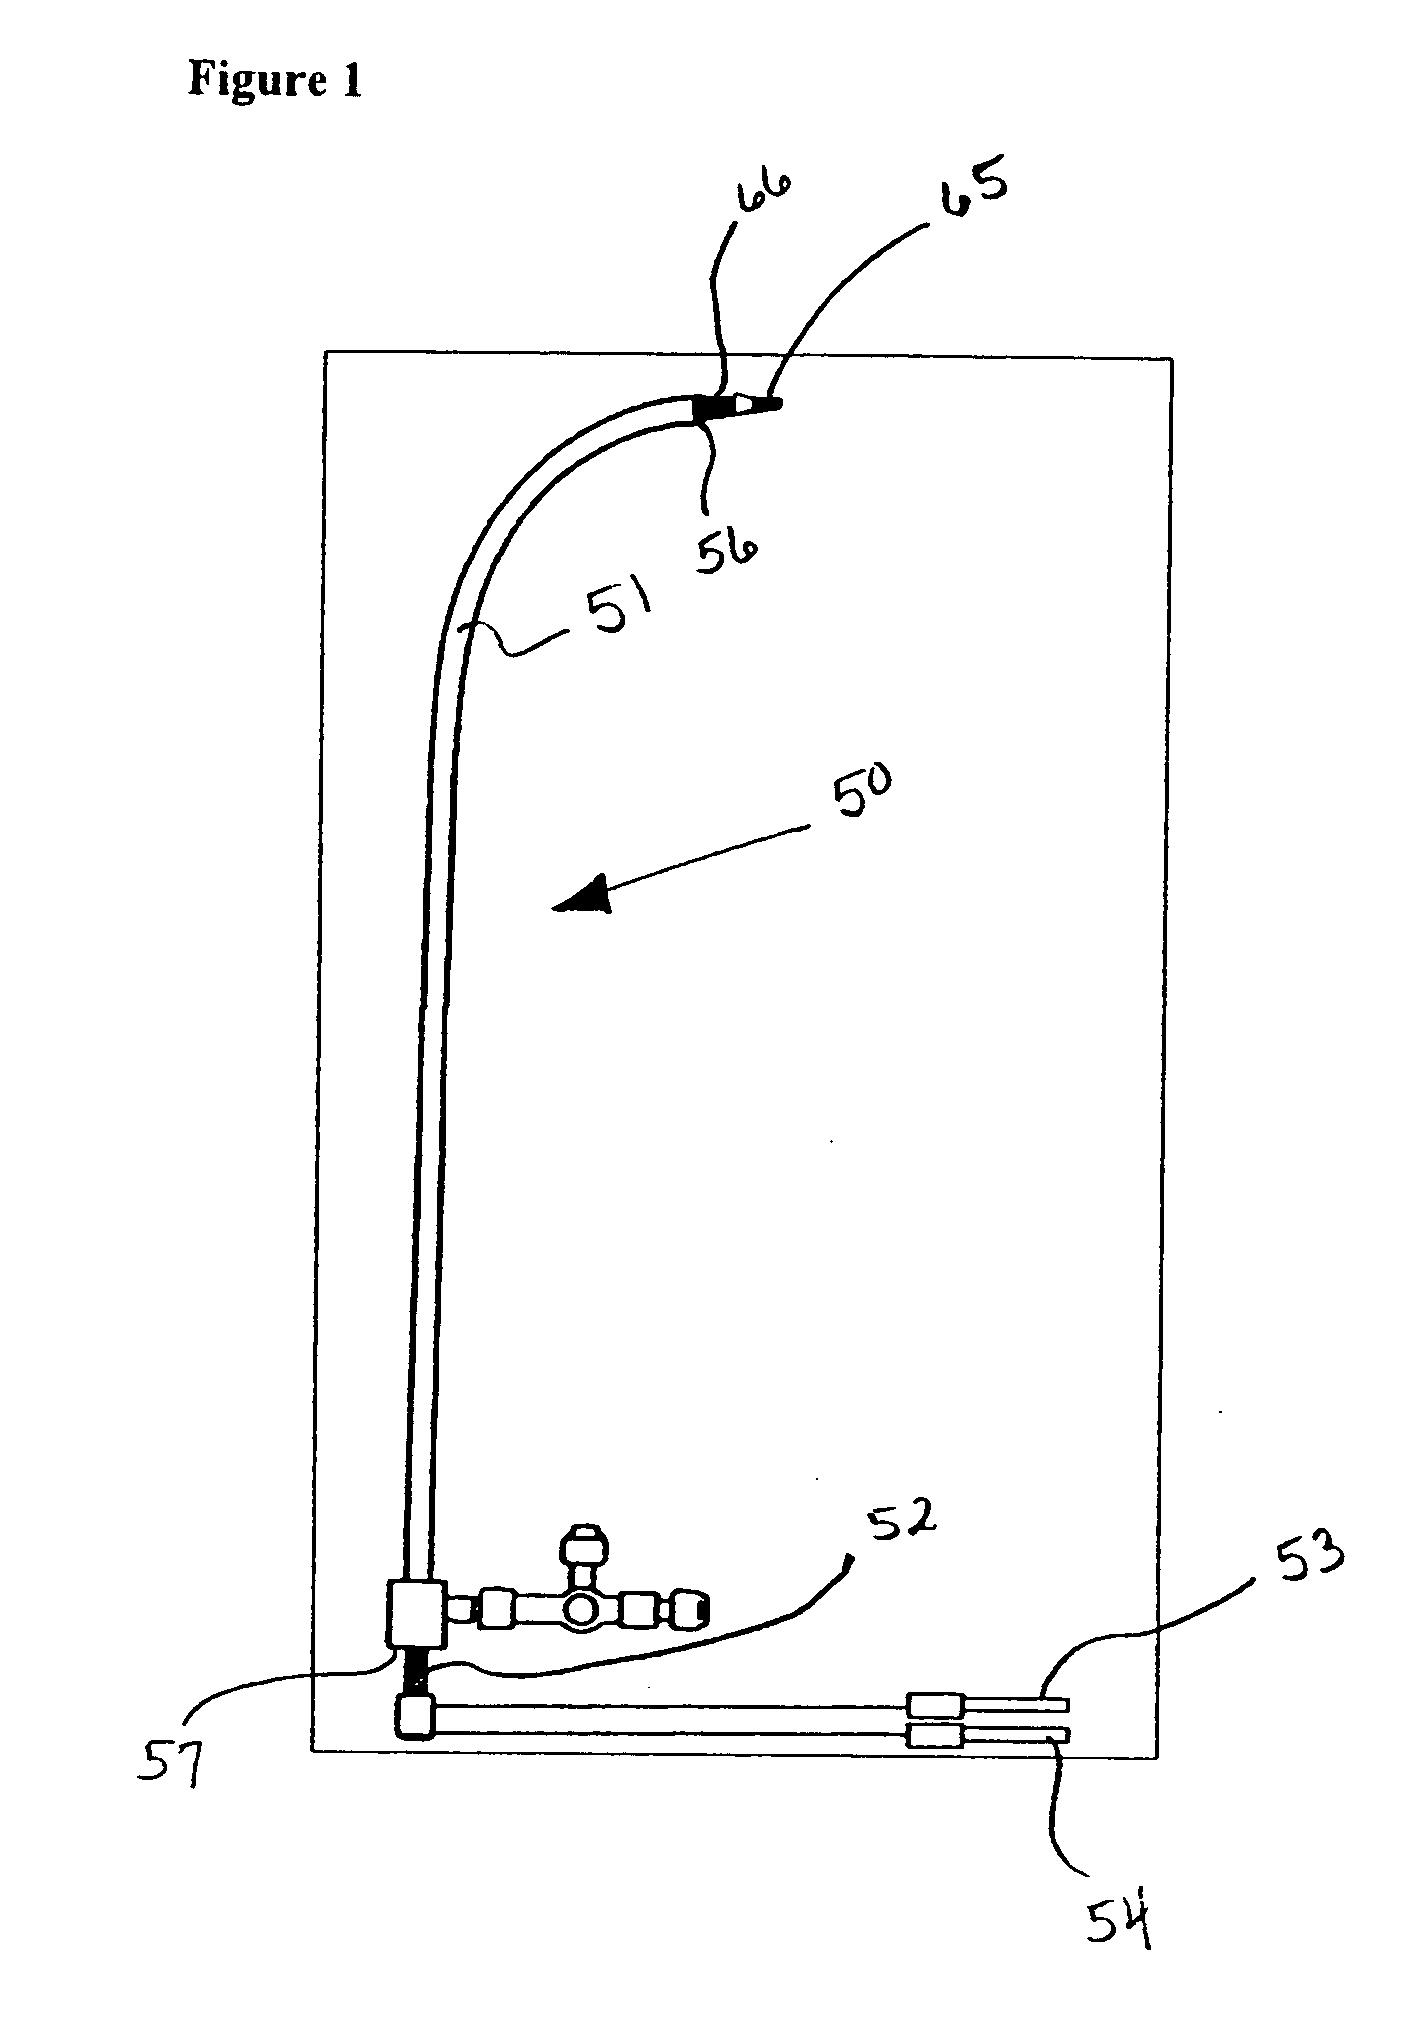 Method and apparatus for locating the fossa ovalis, creating a virtual fossa ovalis and performing transseptal puncture